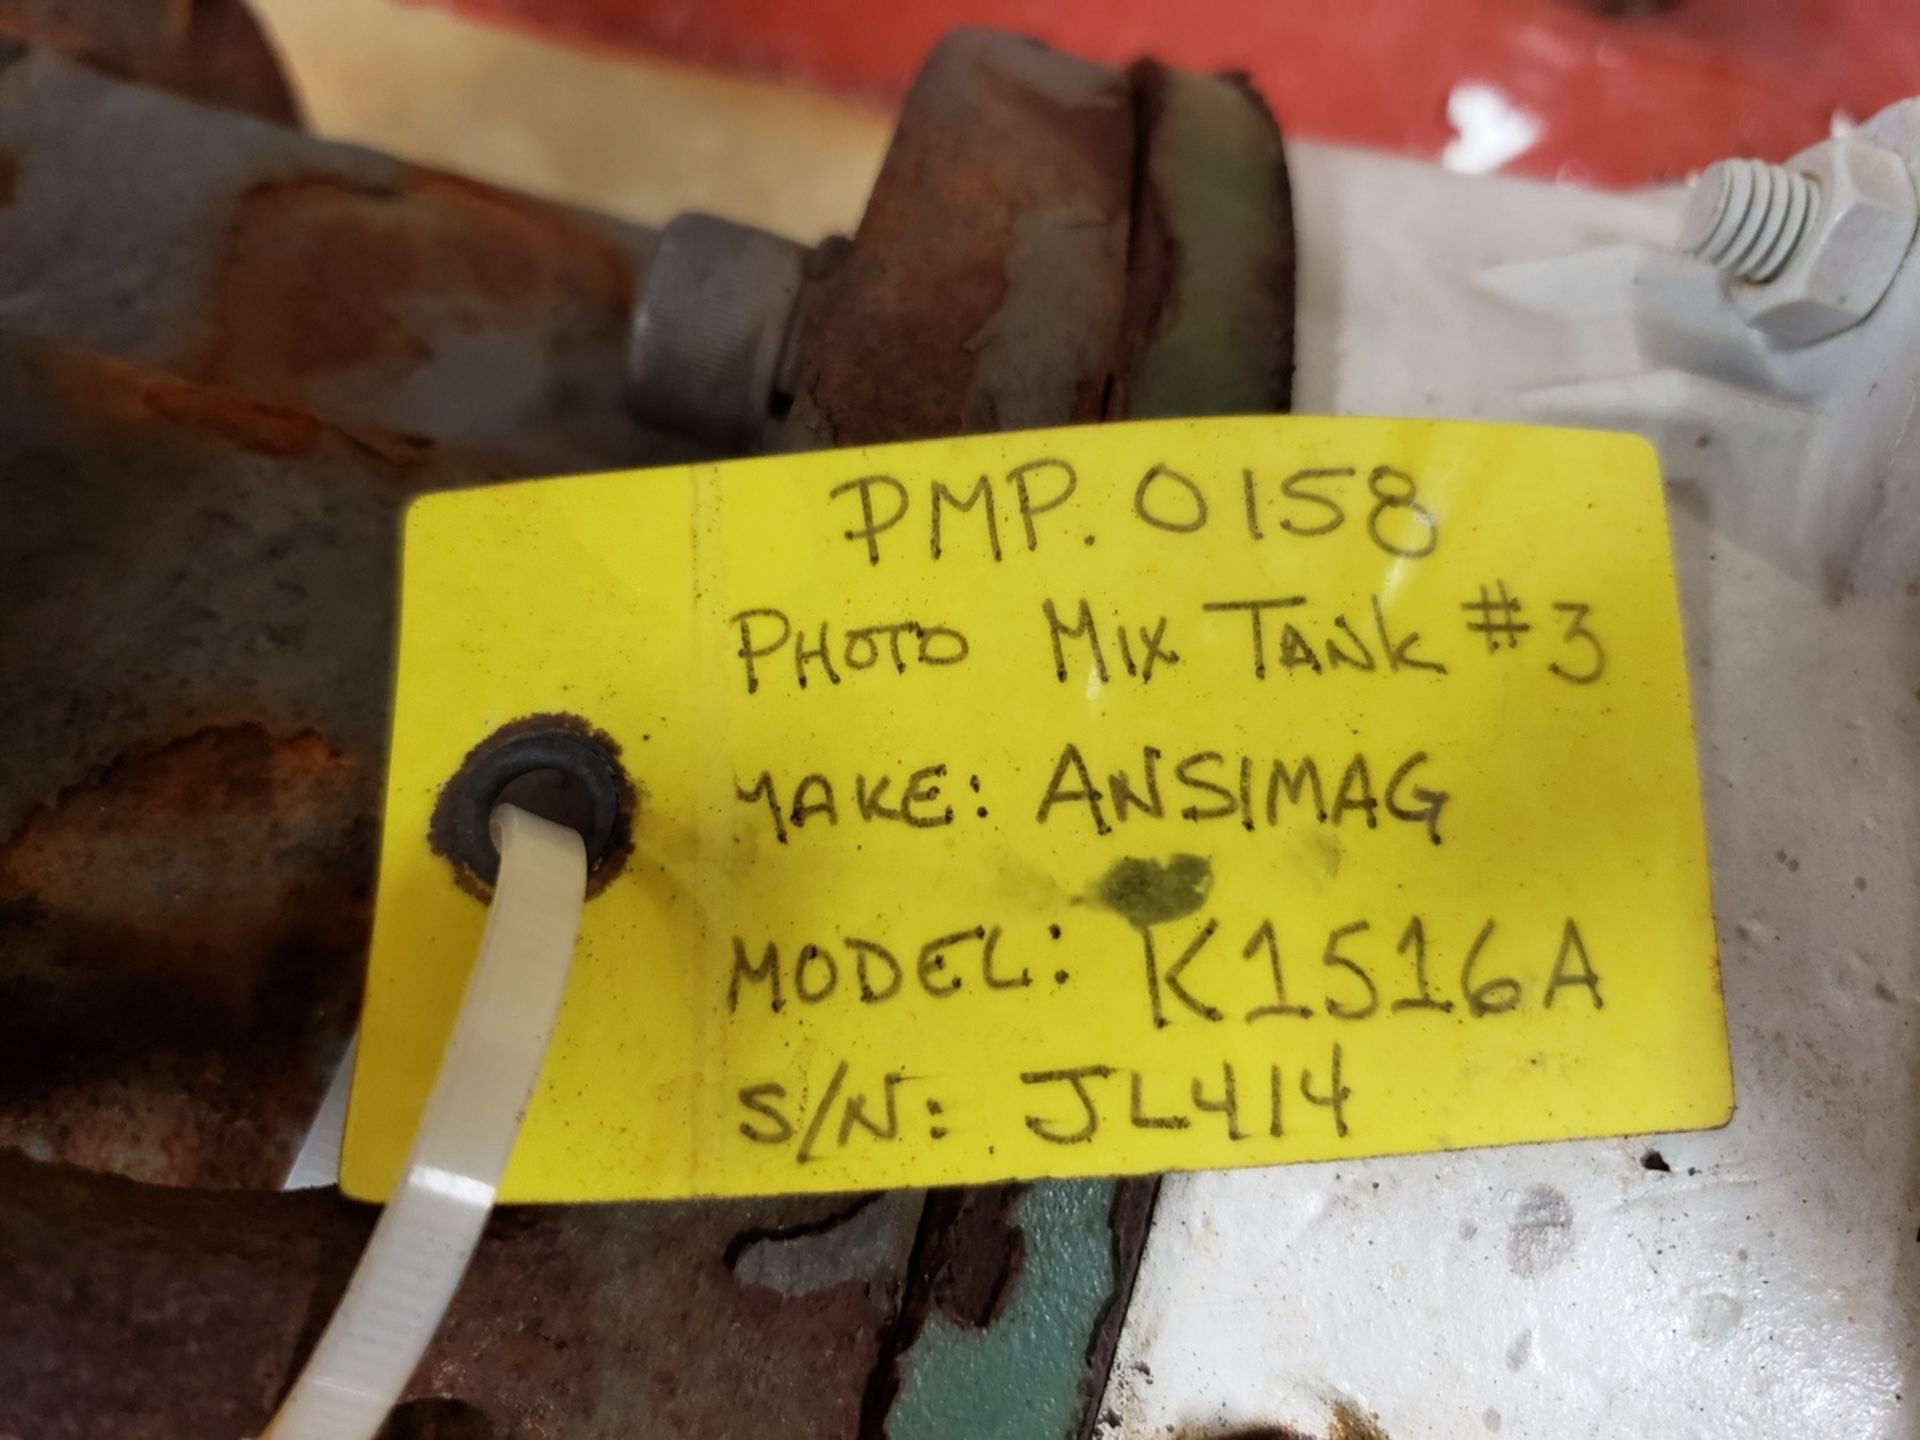 Ansimag 7 1/2 HP Transfer Pump, W/ Valves & Fittings, (Ref. PMP 0158) | Rig Fee $125 - Image 3 of 4